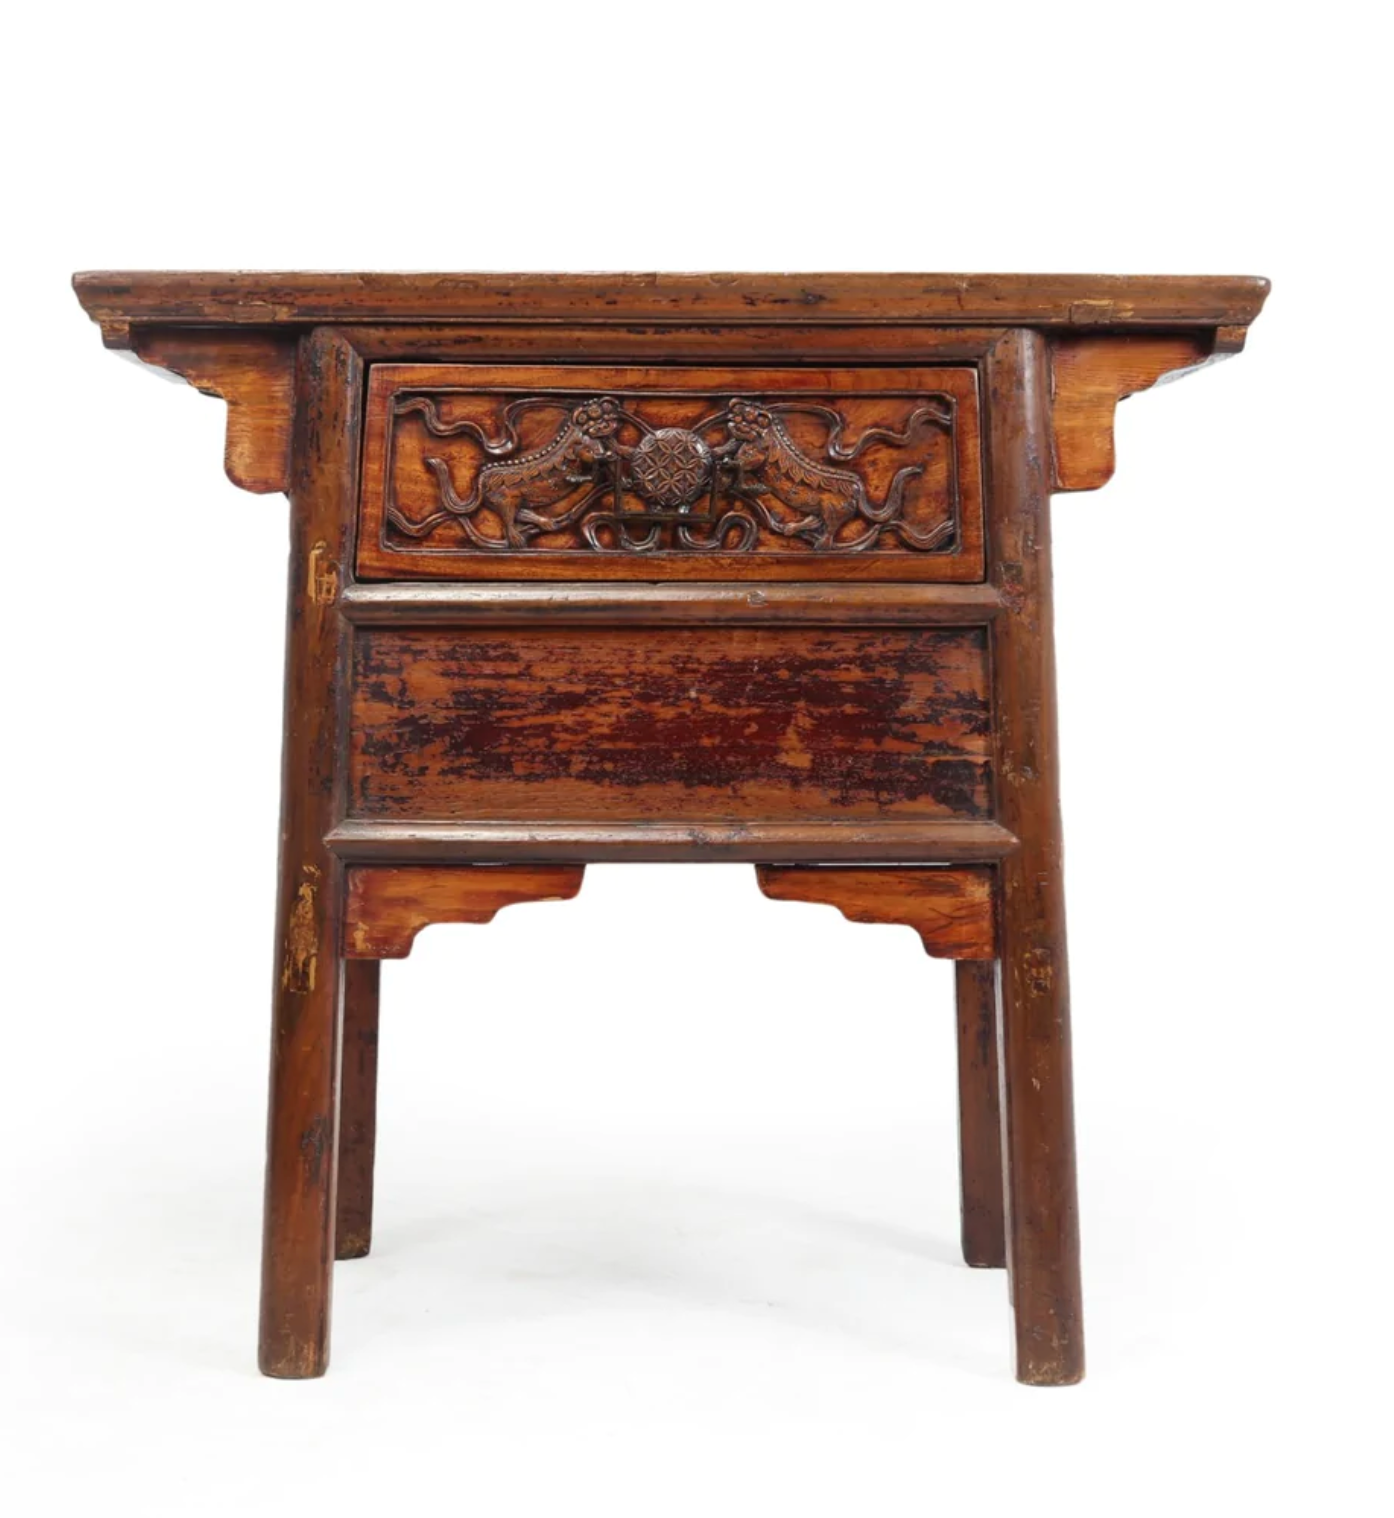 Antique chines side console table